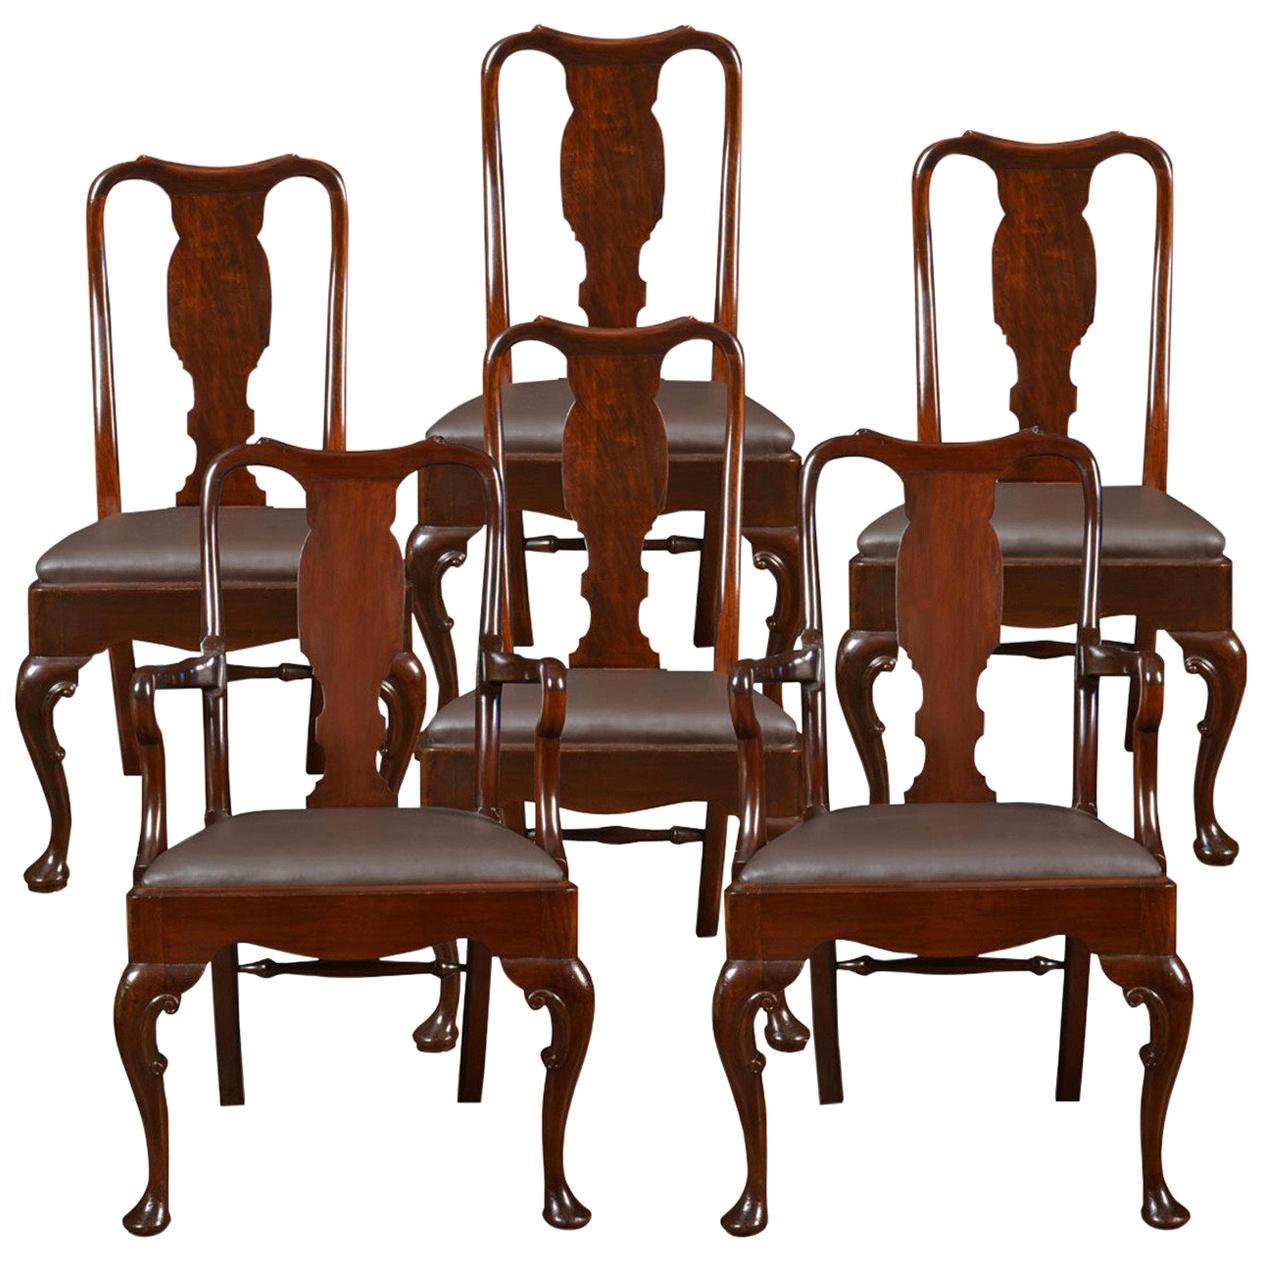 Set of Six Early 20th Century Queen Anne Style High Back Dining Chairs